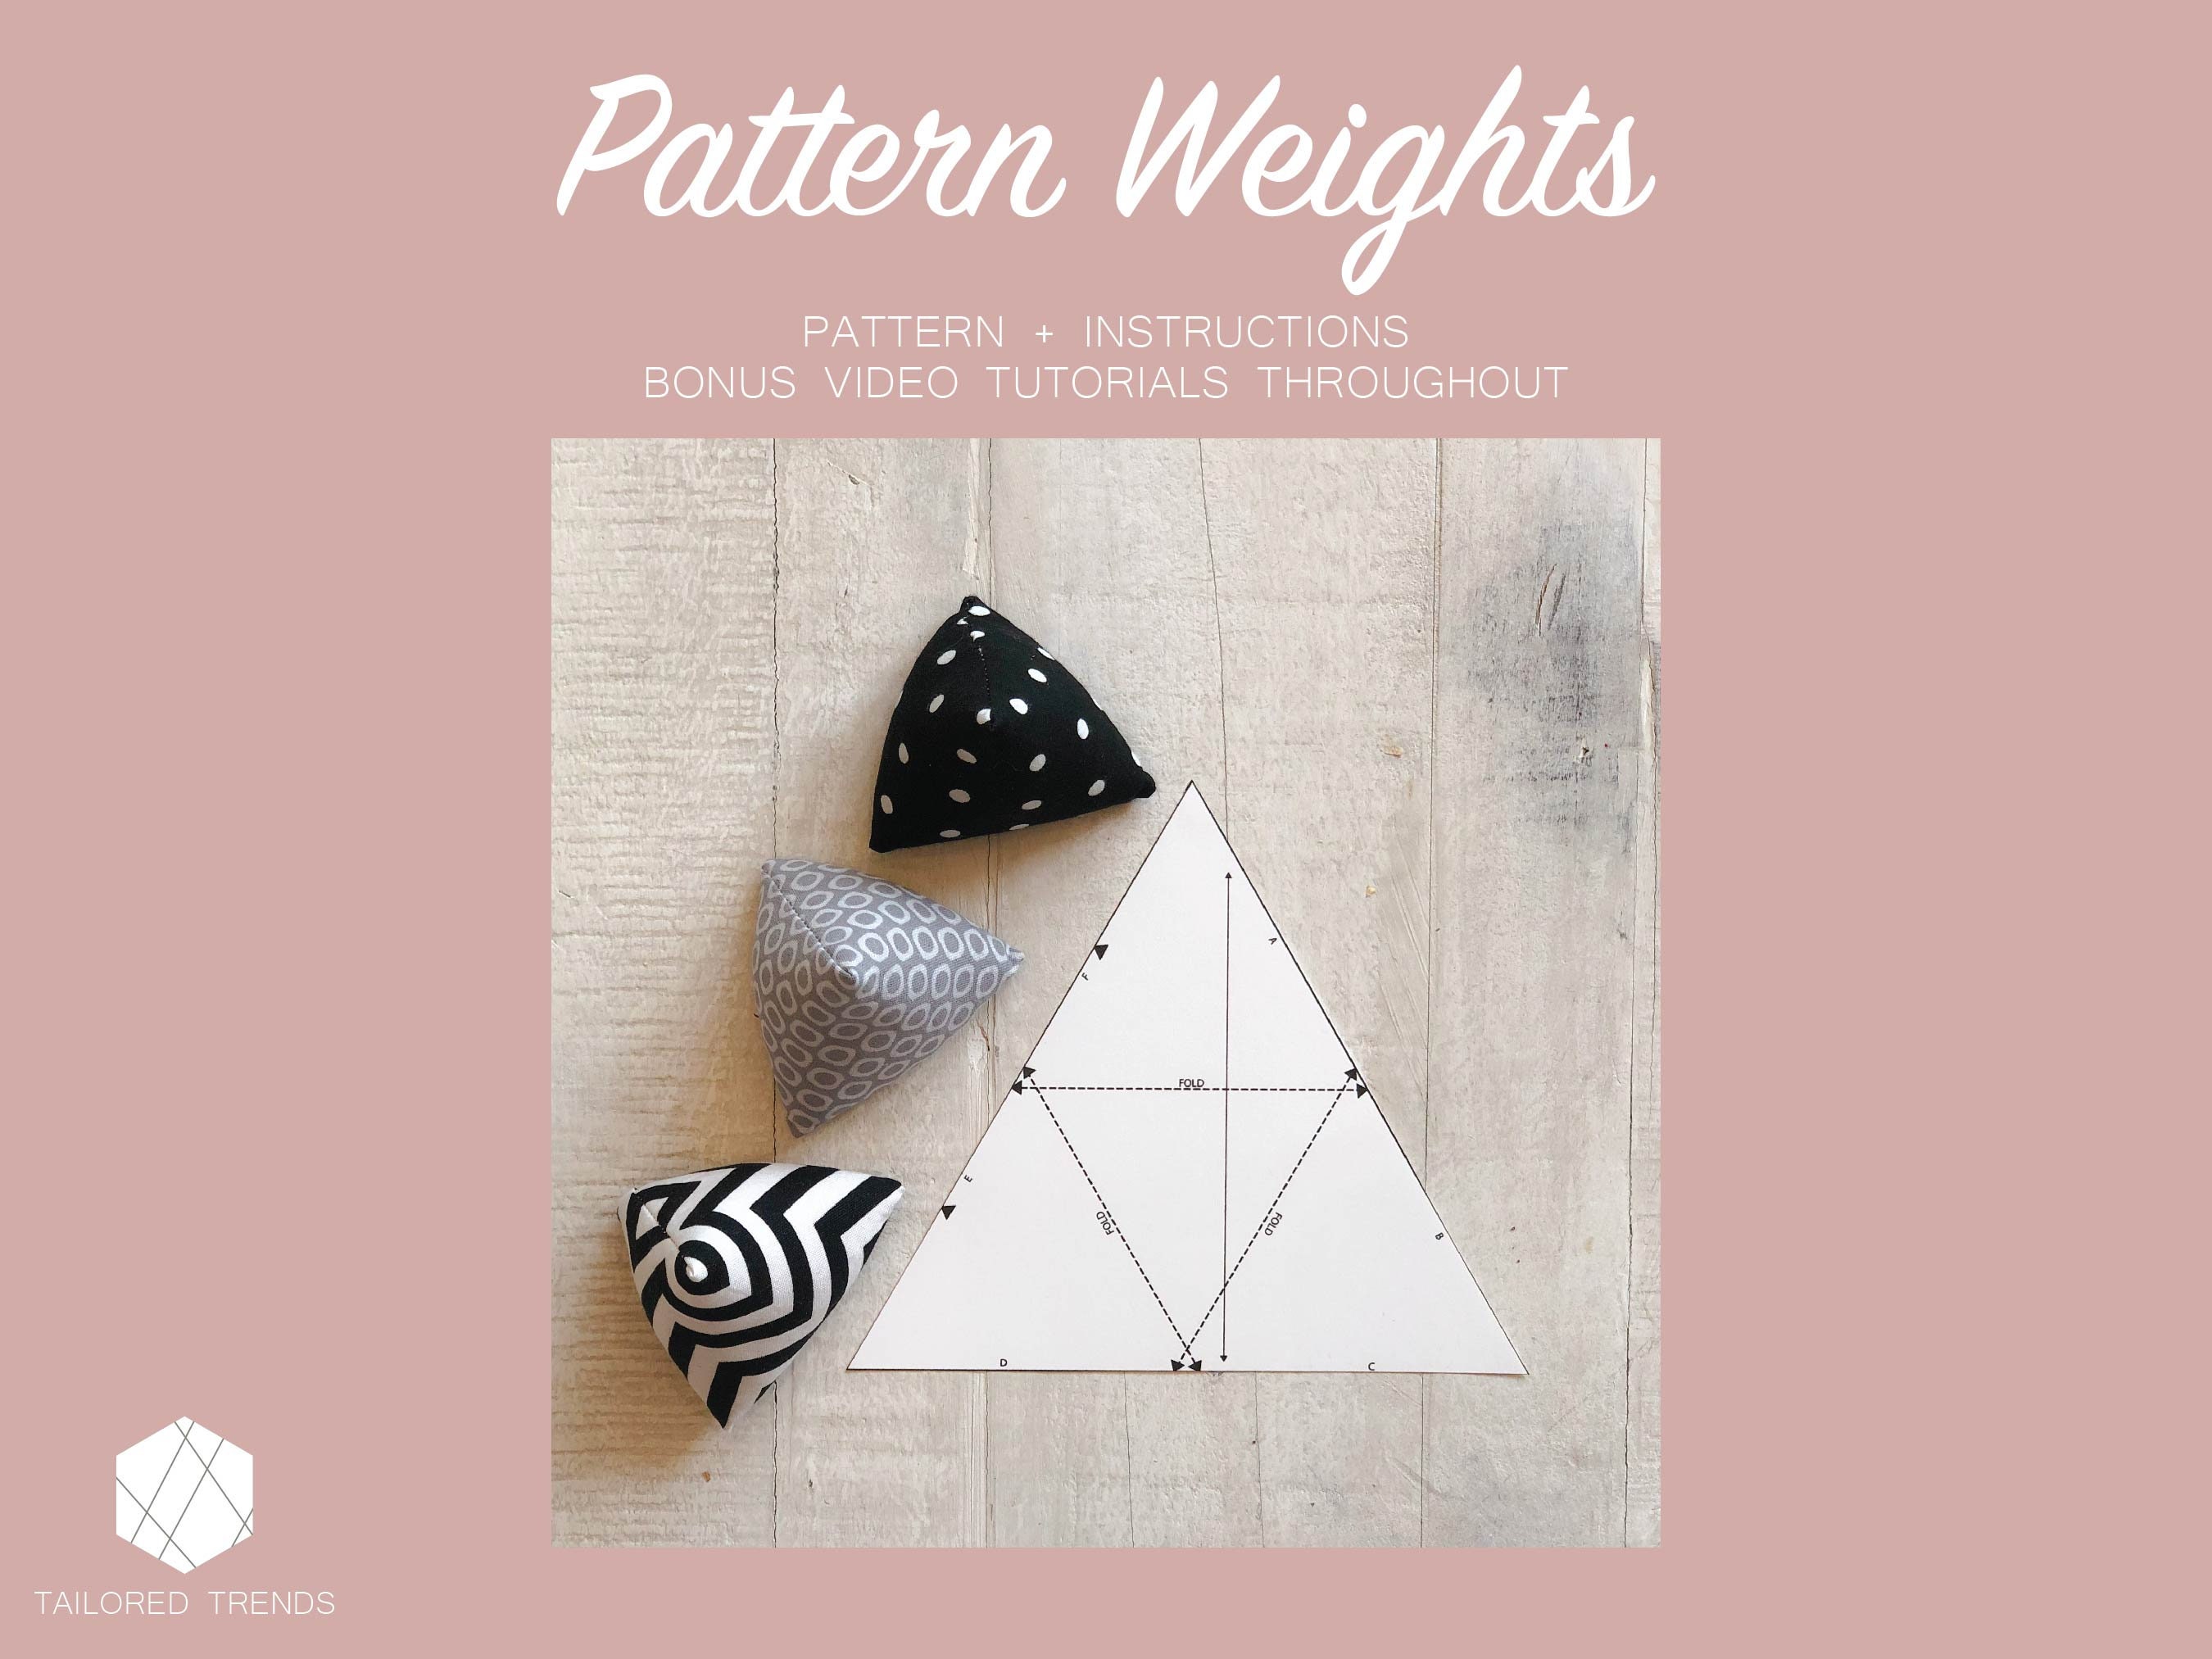 Contoured Wooden Easy Grip Sewing Pattern Weights Handmade in Red Oak Wood  Sewing Notions 